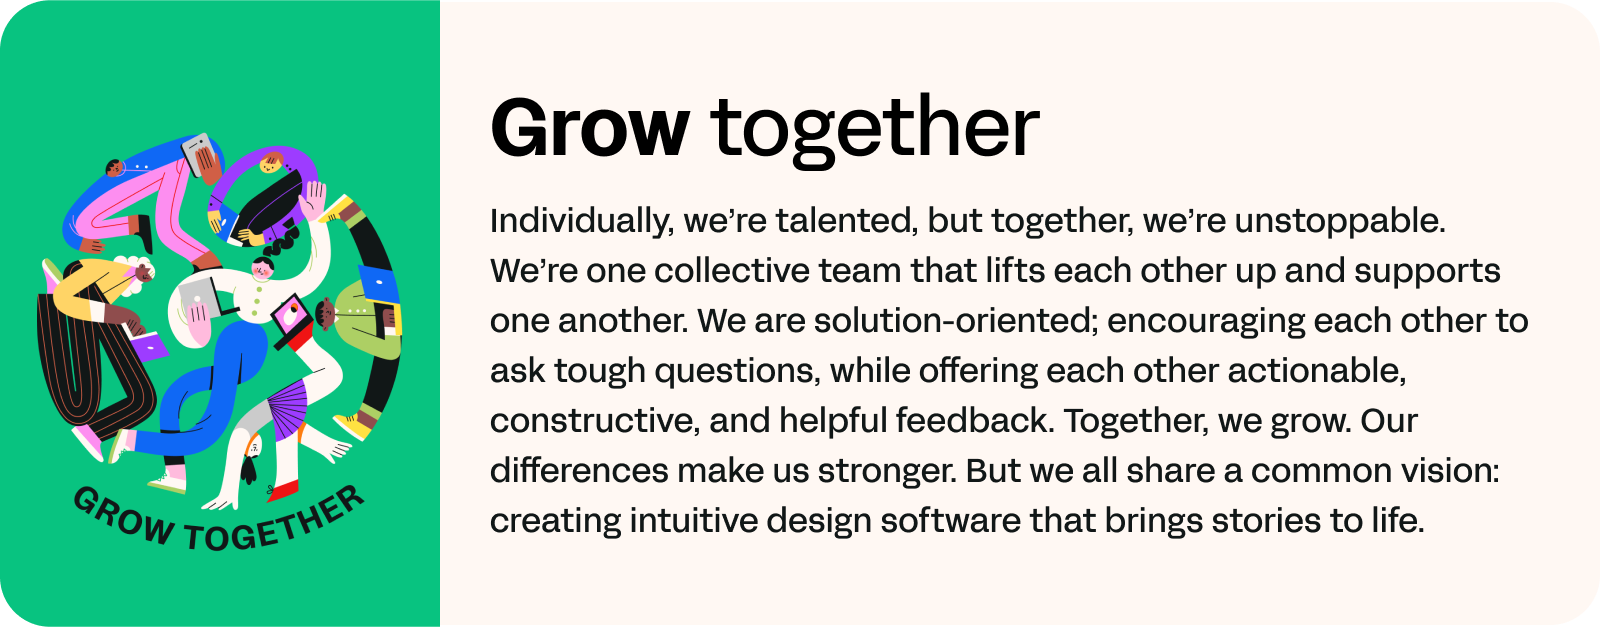 Linearity company values: grow together